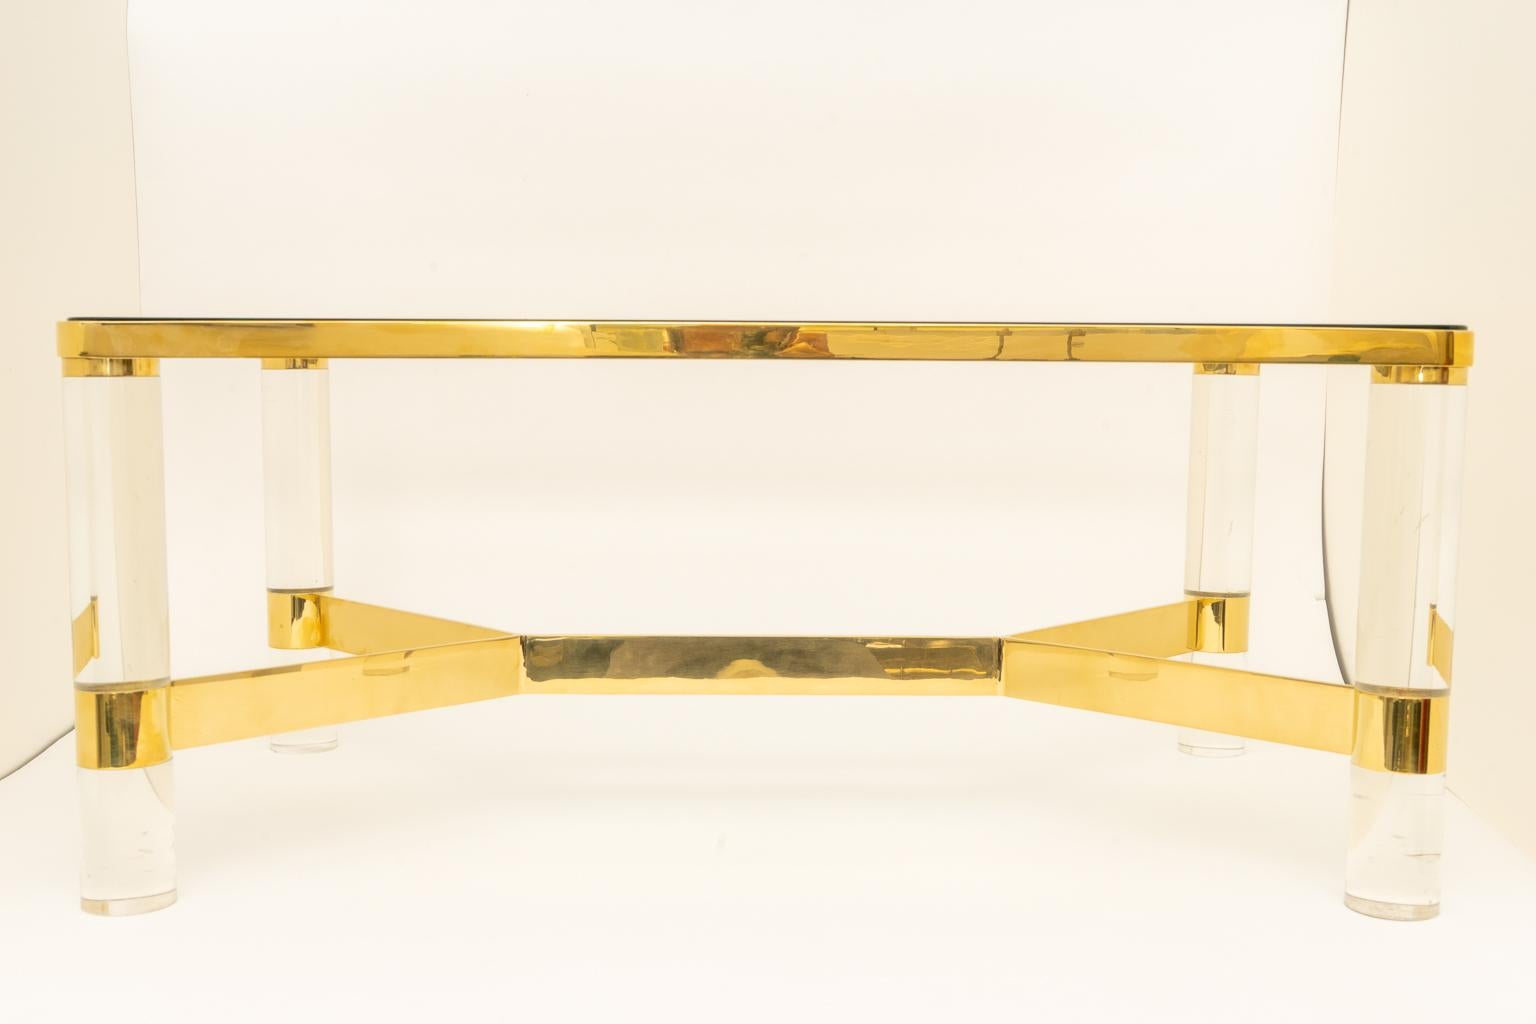 This stylish and chic cocktail table dates to the 1980s and was created by the iconic American furniture designer Karl Springer. The piece was acquired from a Palm Beach estate.

Note: See the last image for the signature of Karl Springer.